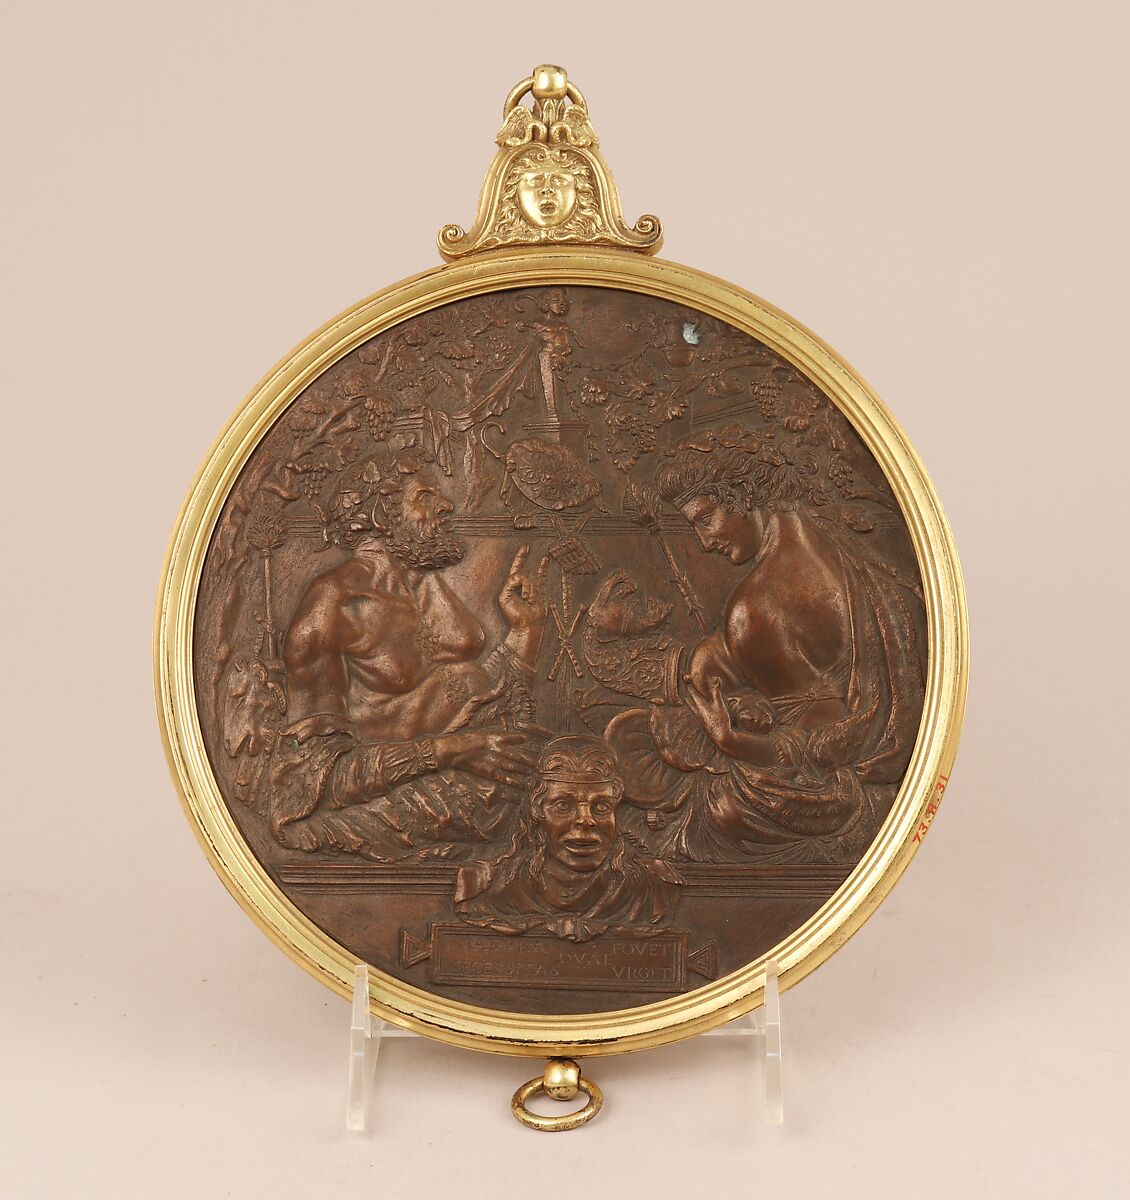 Mirror case, After an original by Donatello (Italian, Florence ca. 1386–1466 Florence), Bronze, inlaid with gold and silver, British, after Italian original 